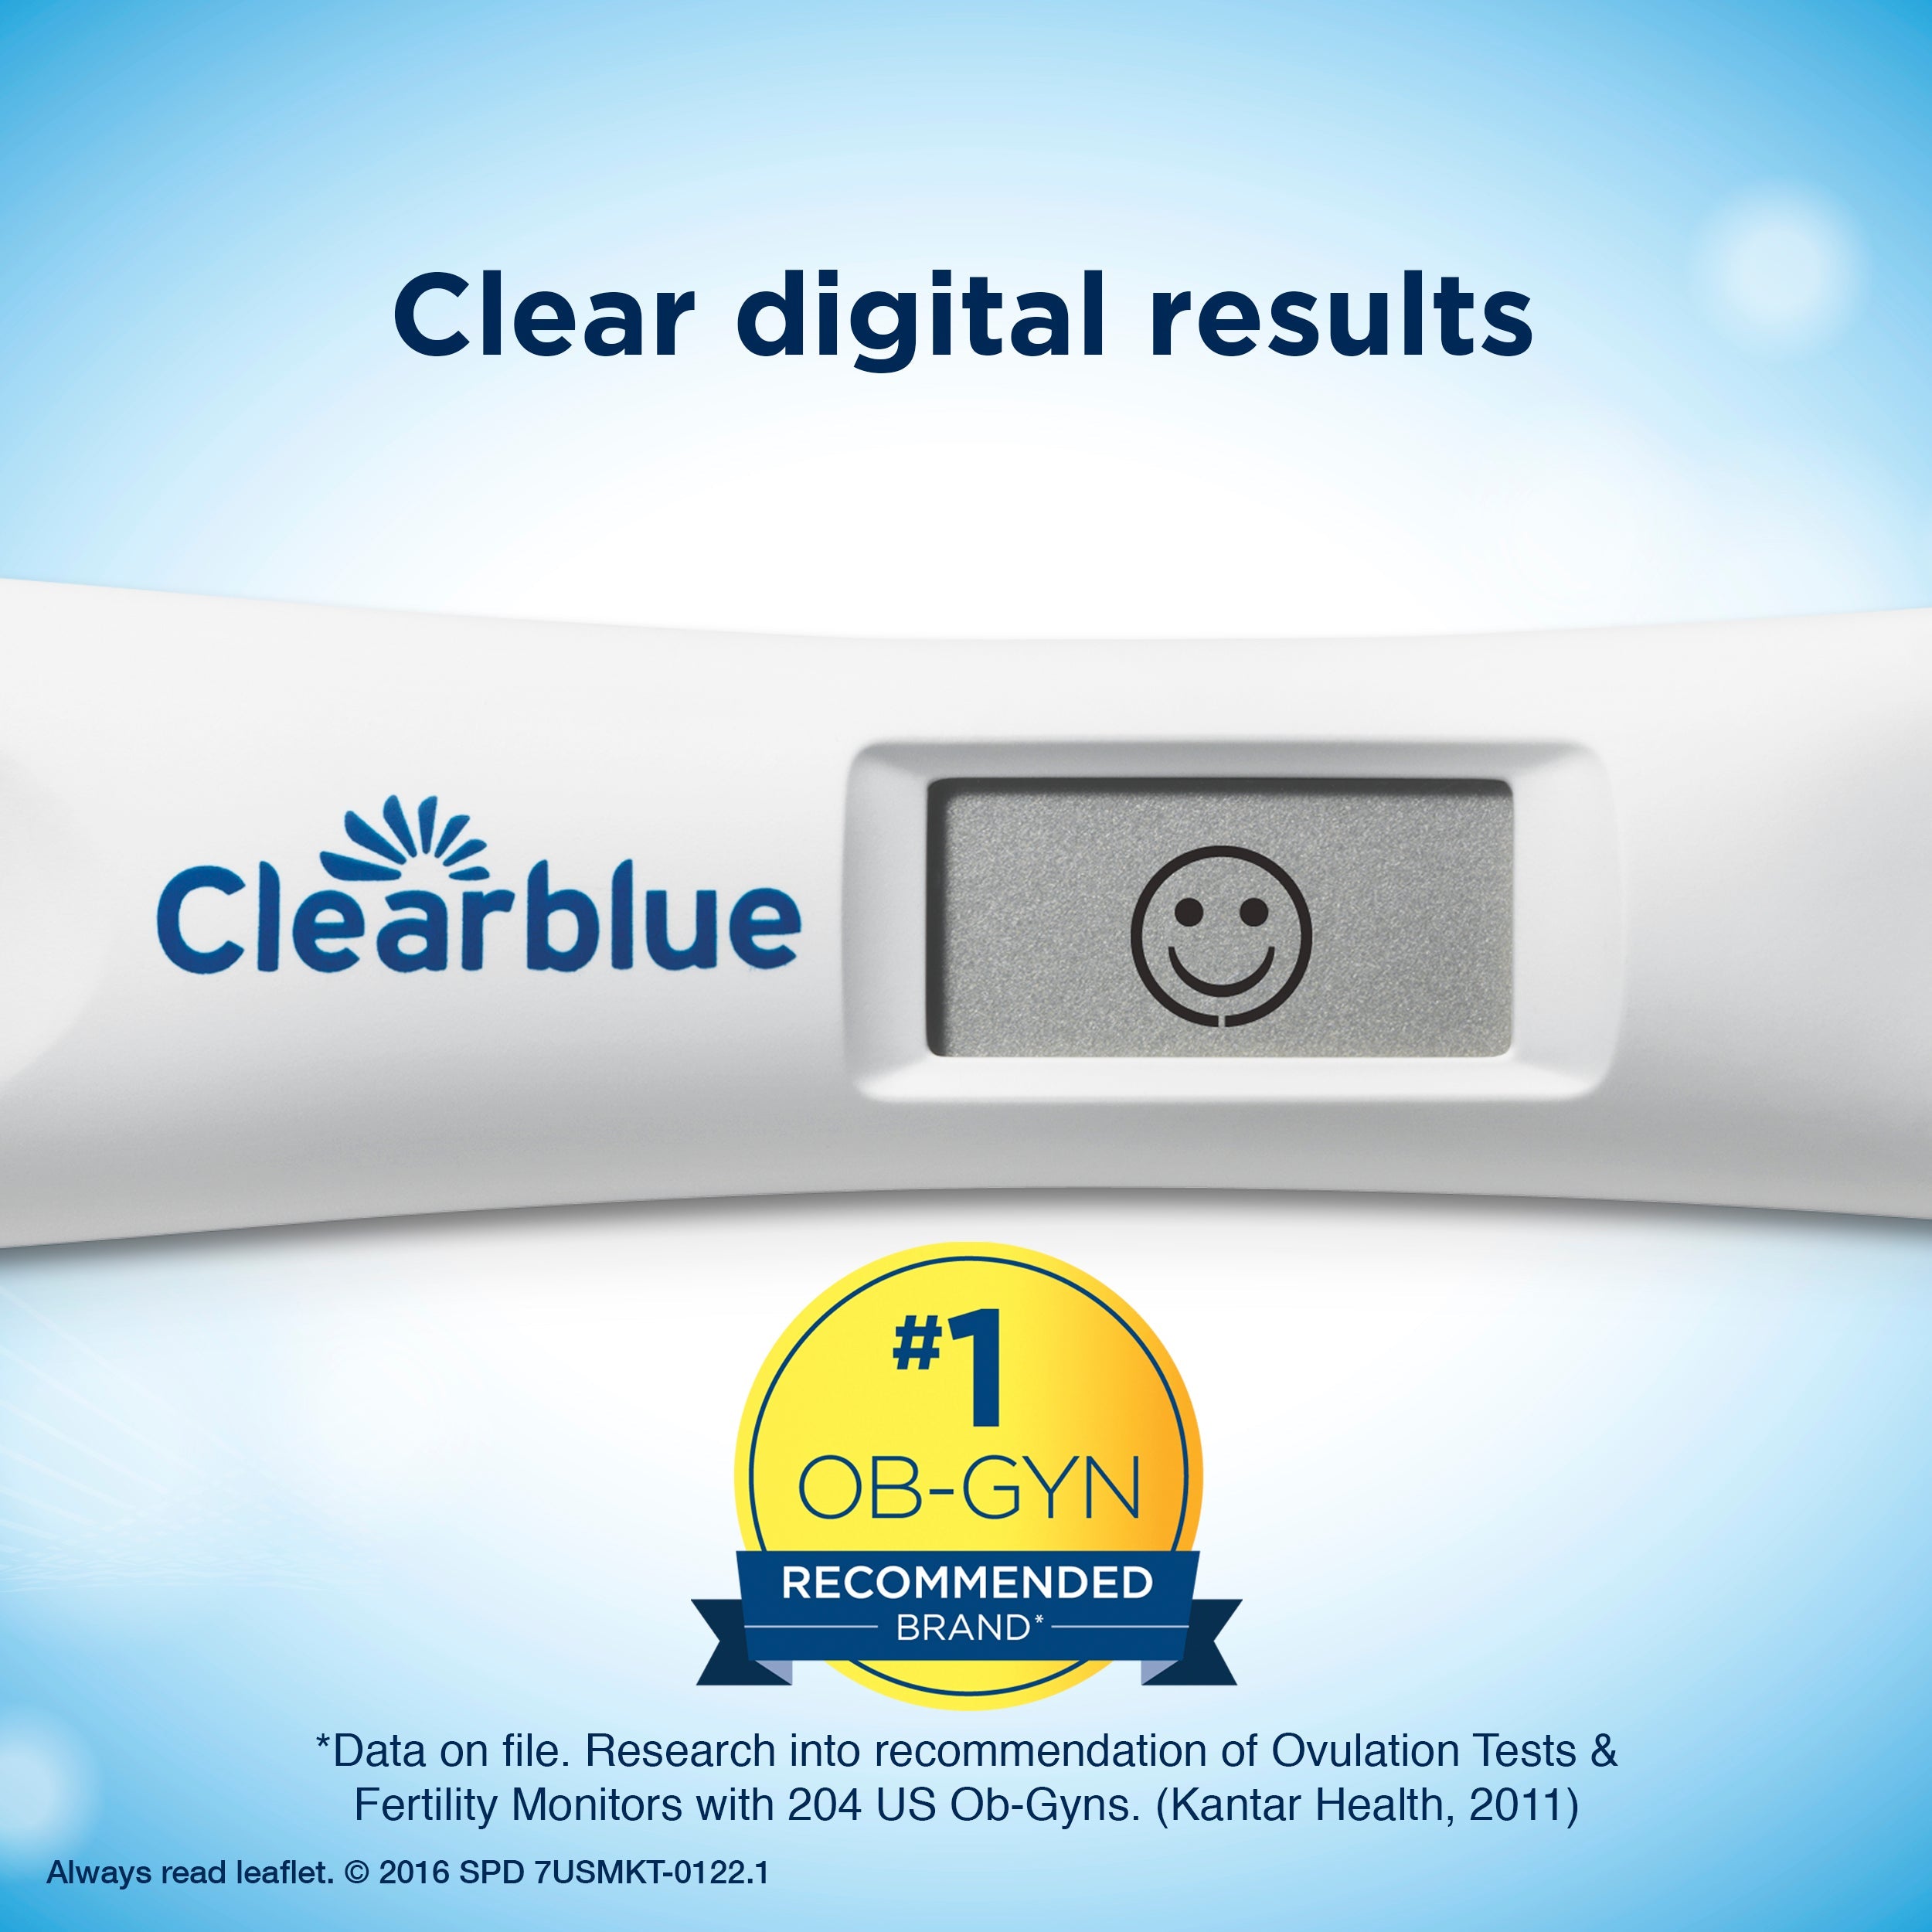 Clearblue Advanced Digital Ovulation Test, 10 count